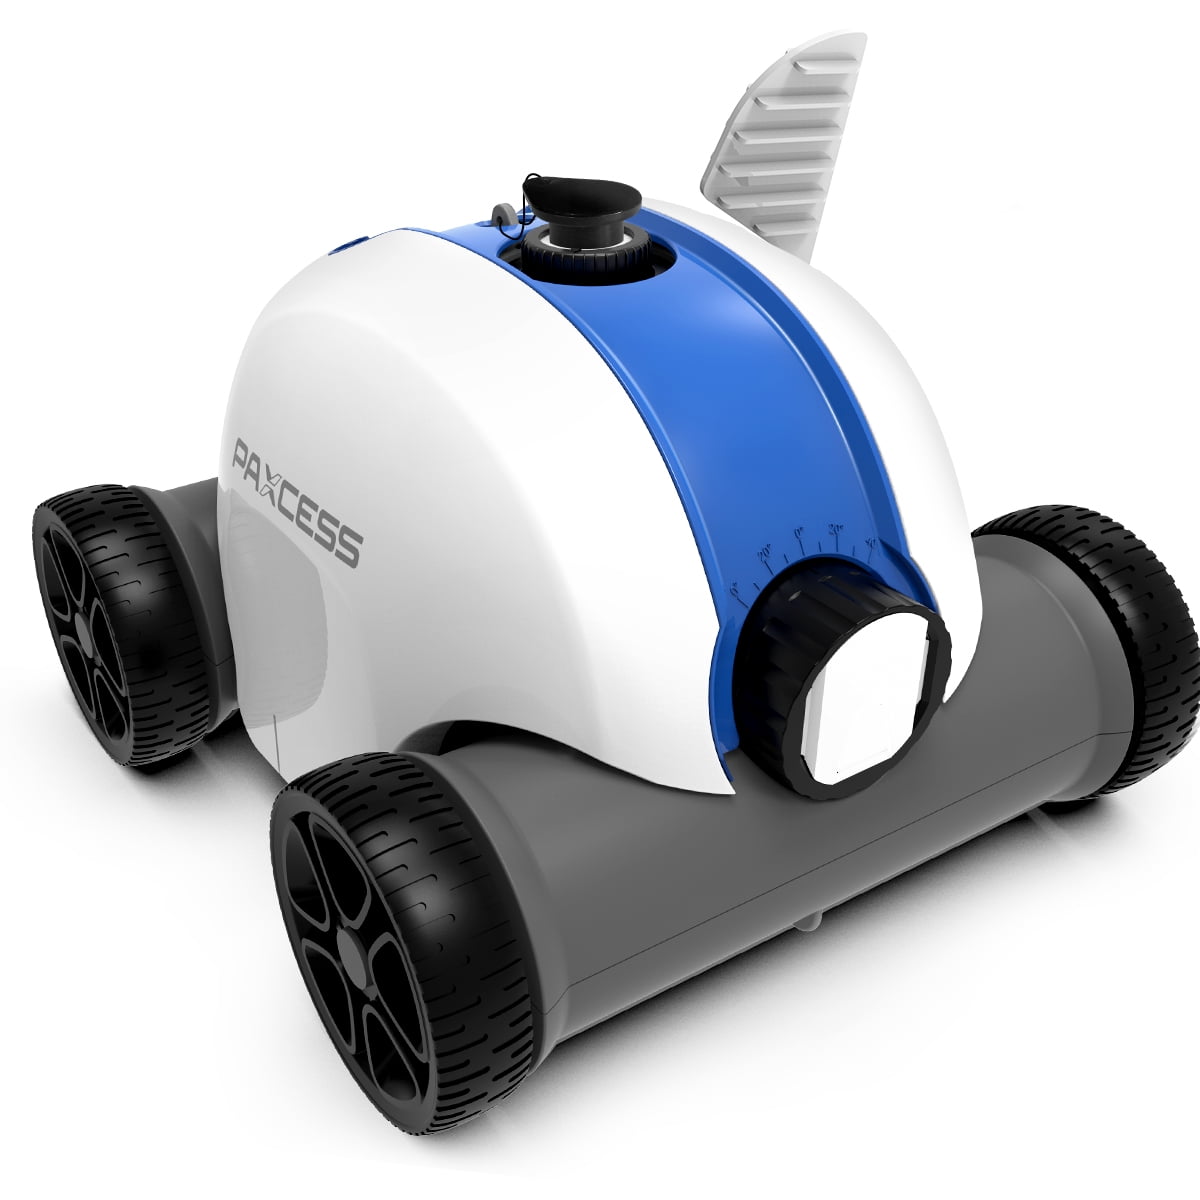 Robotic Pool Cleaners: What Are The Benefits? - GPS Pools